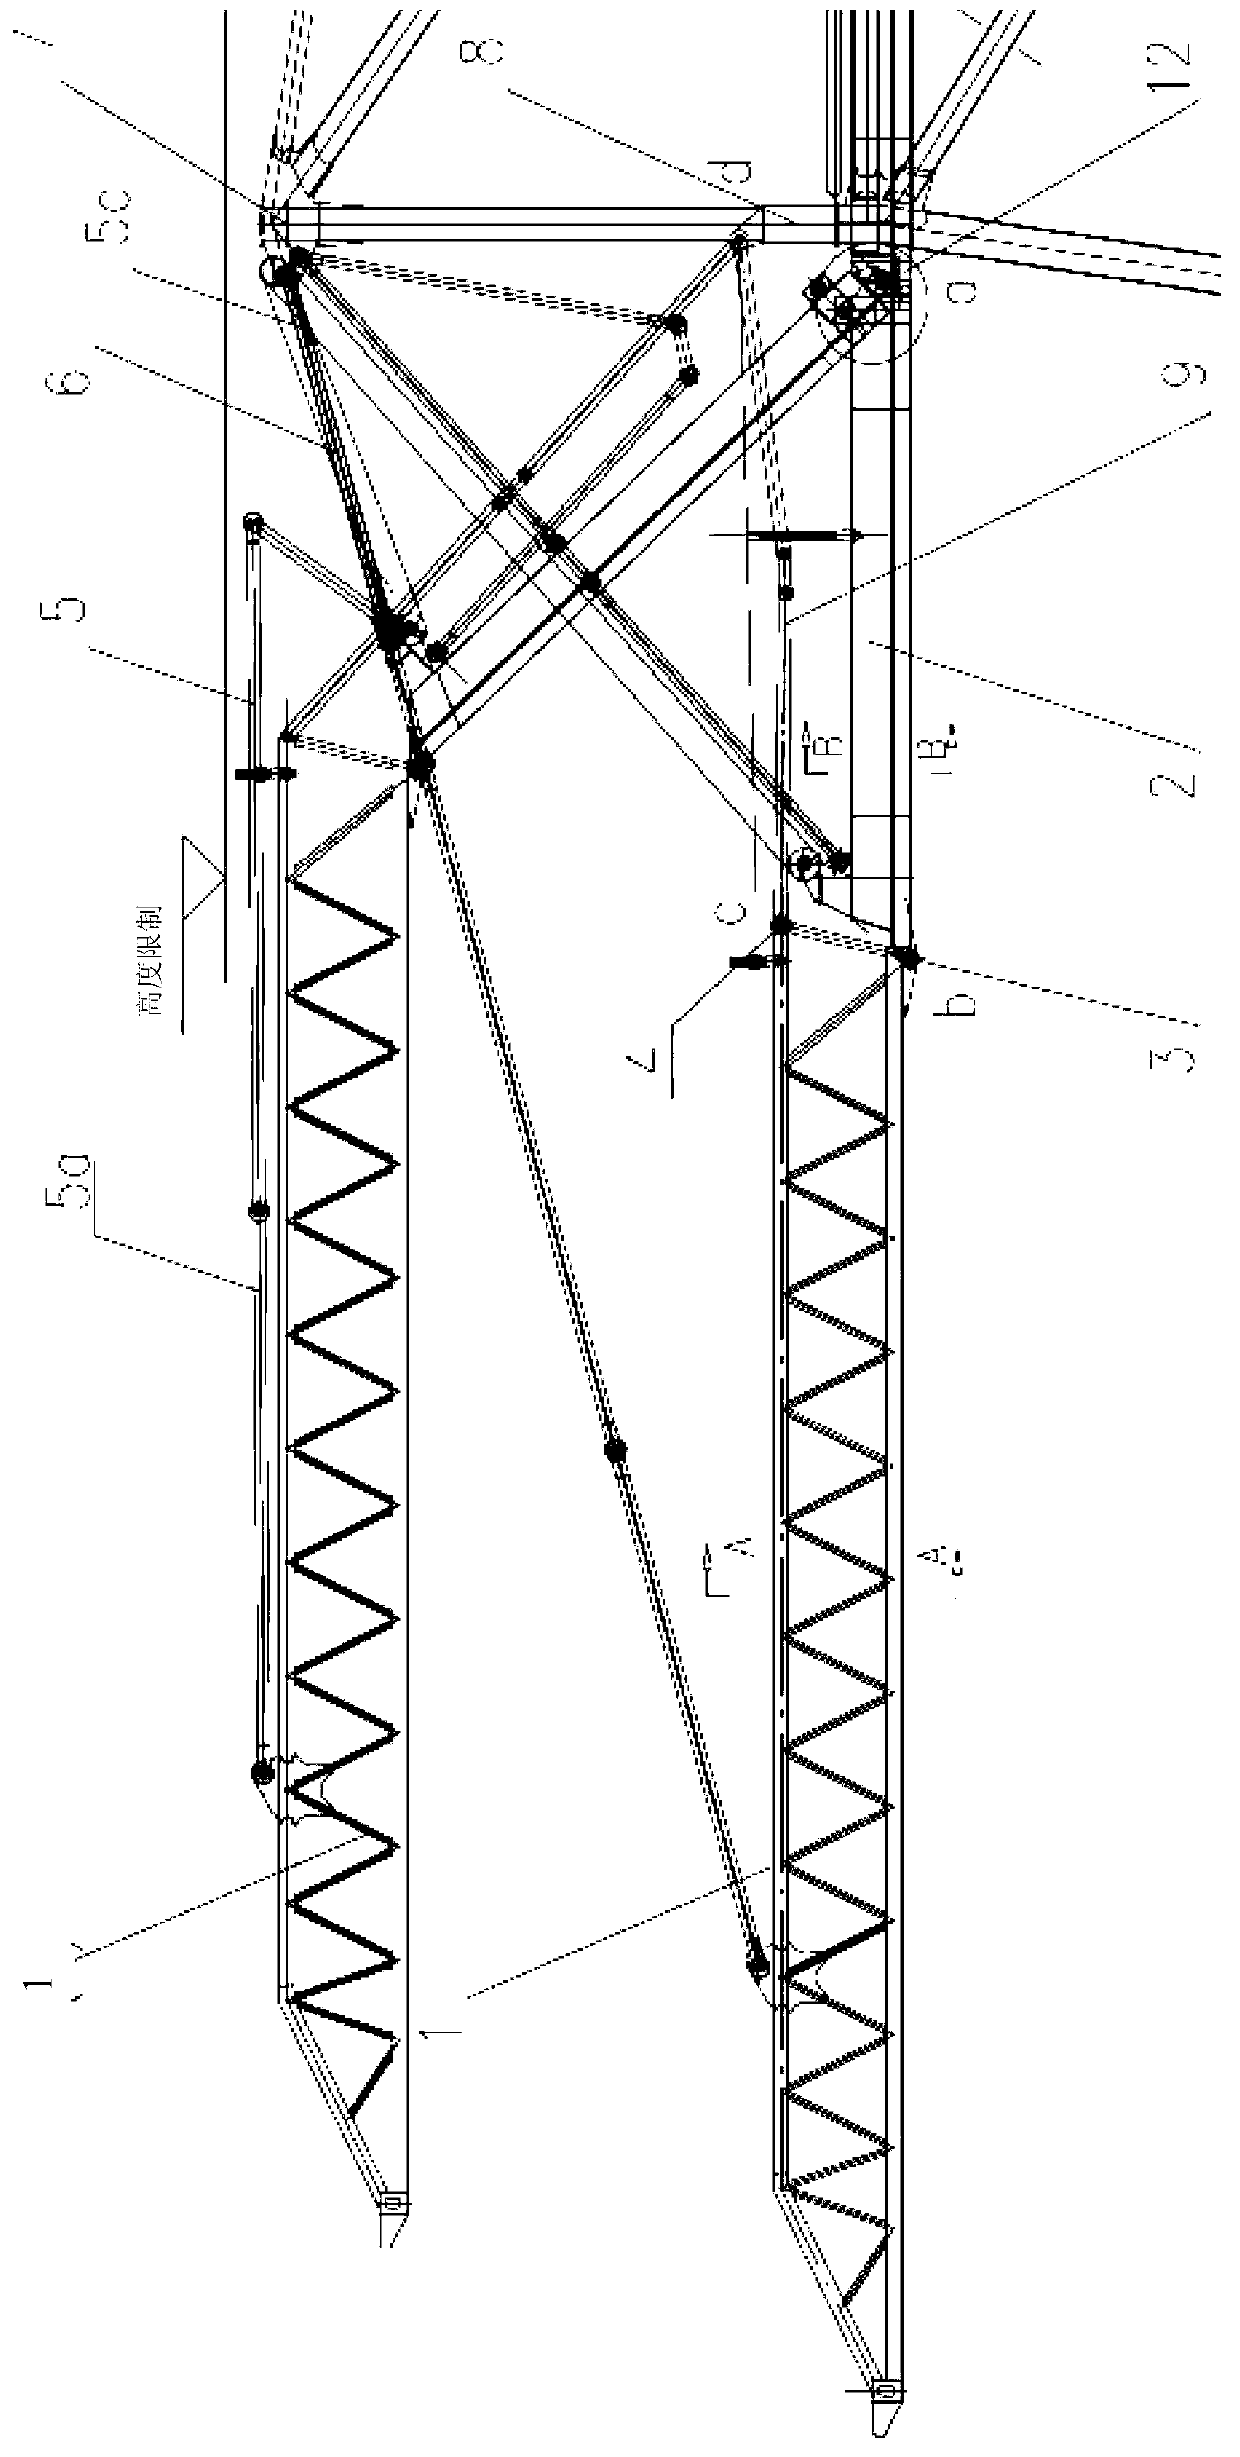 Crane provided with folding arm and beams